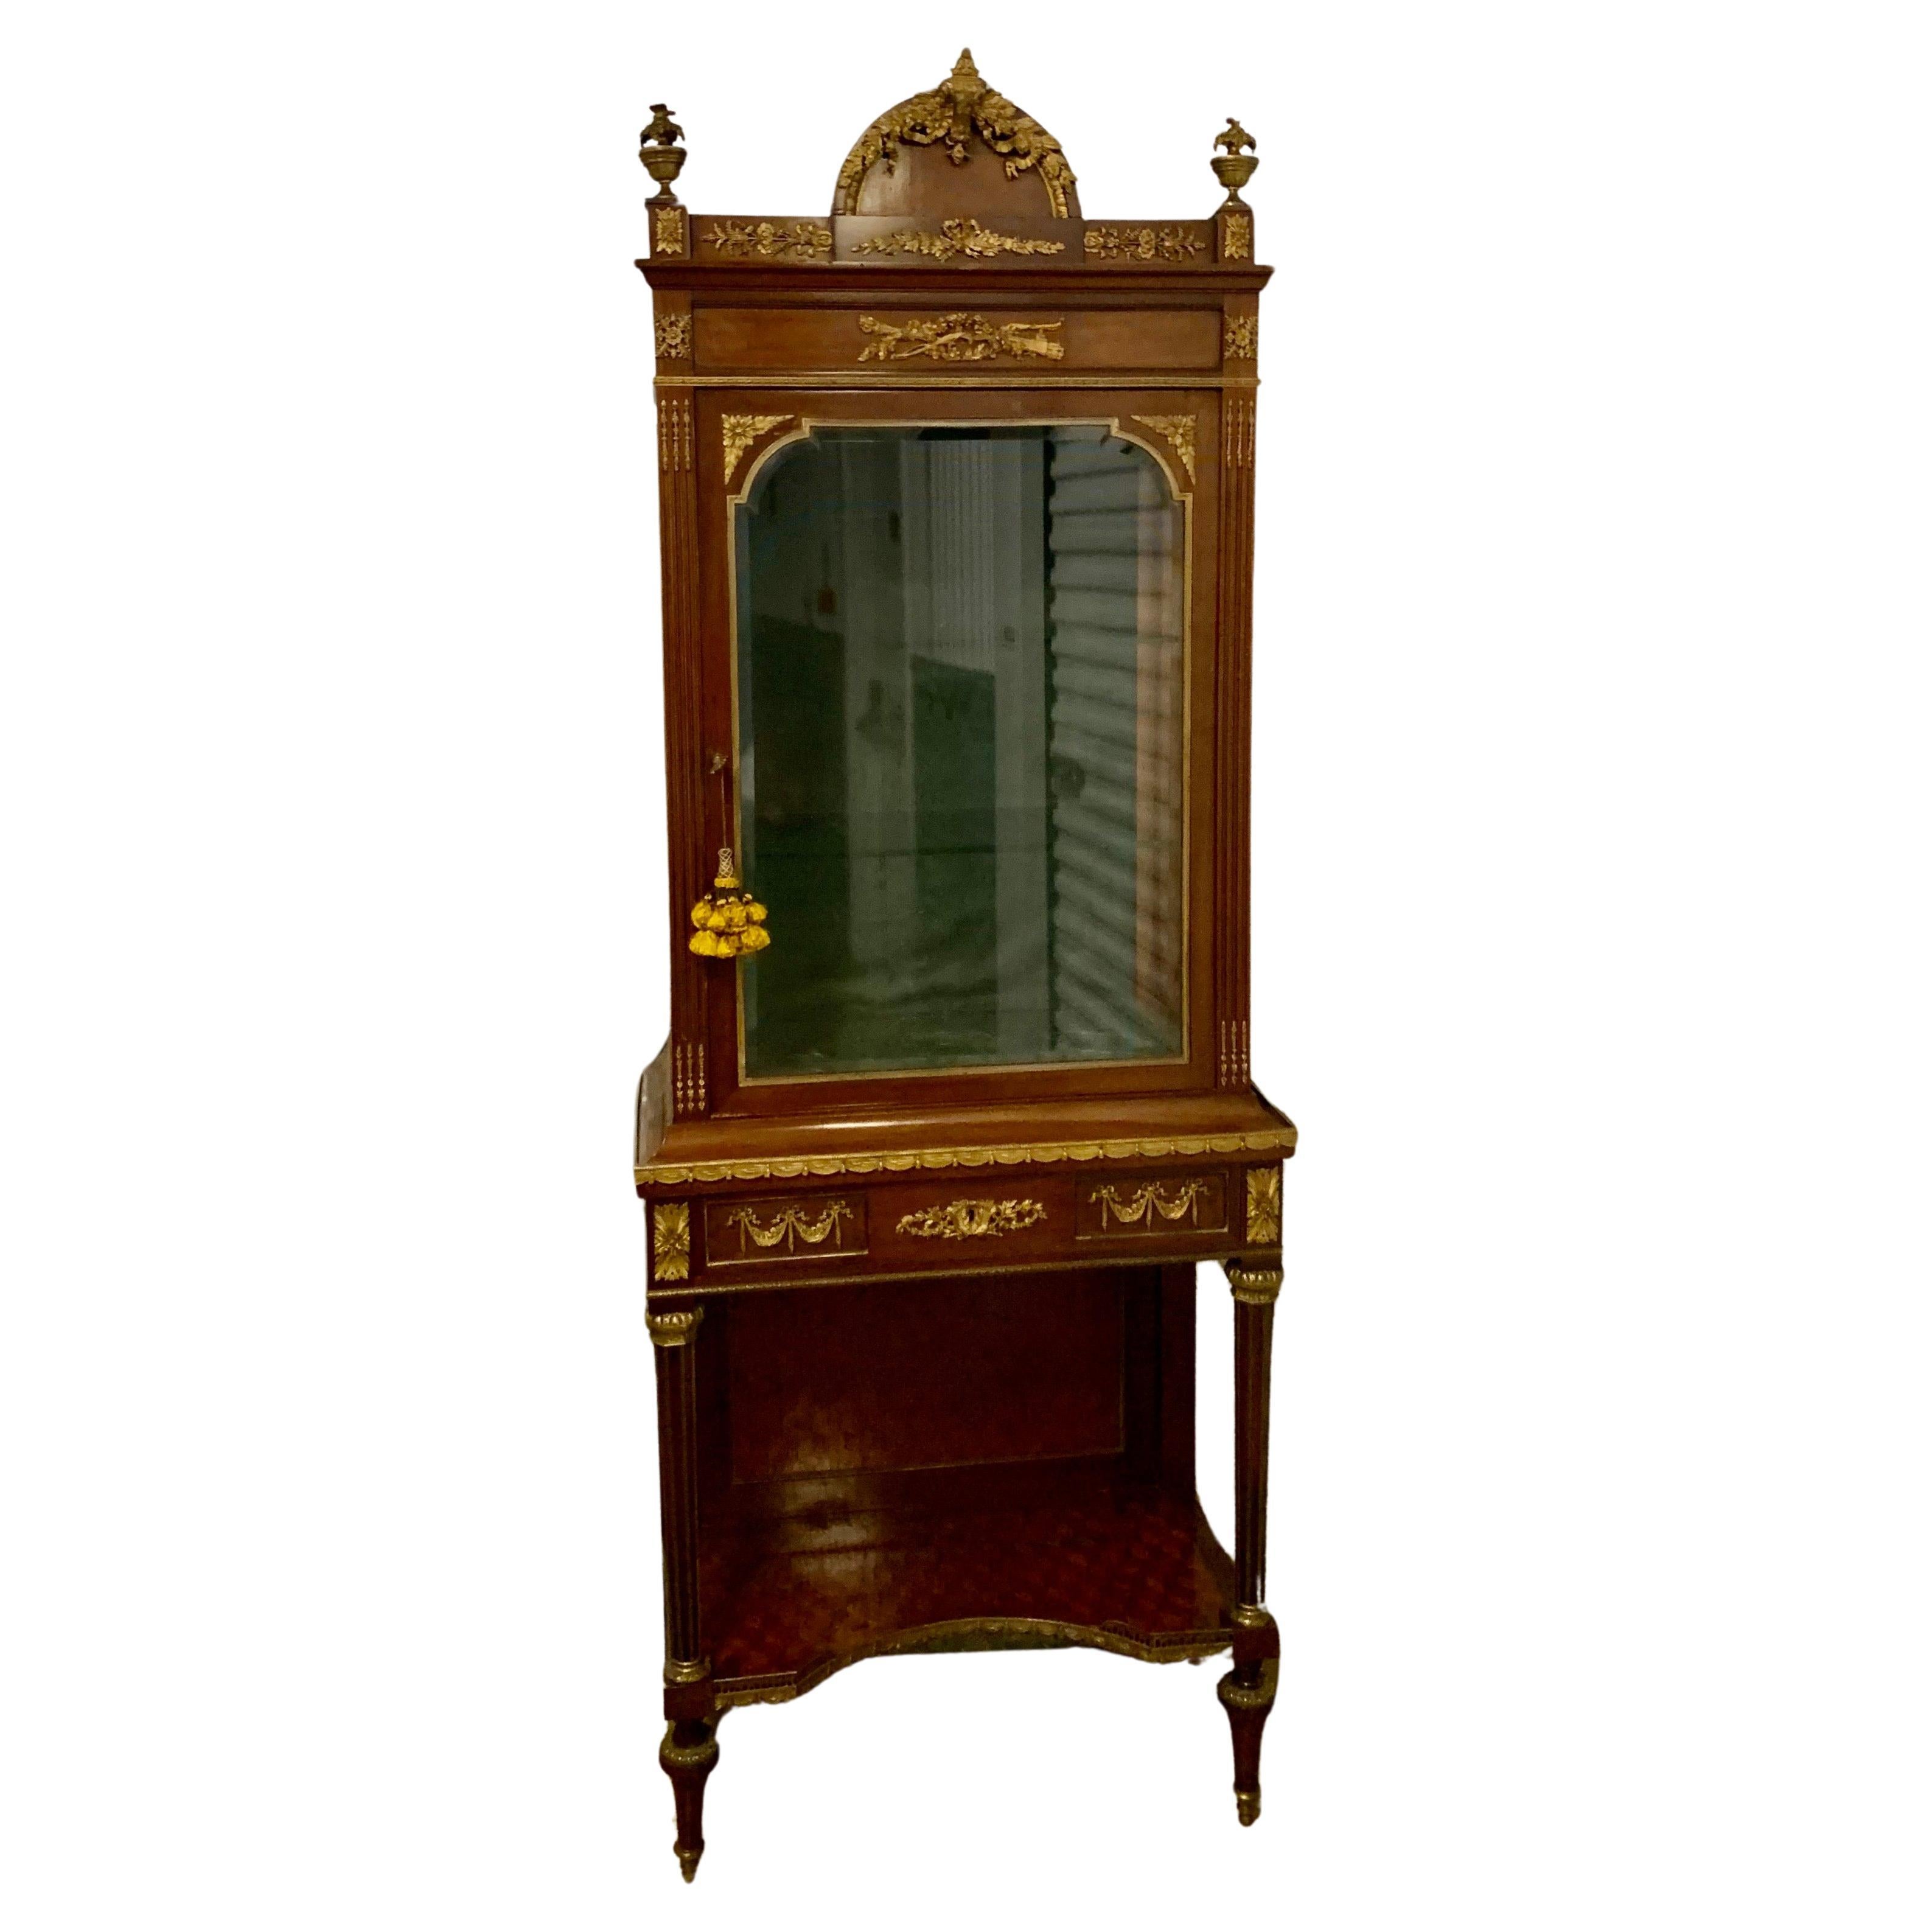 A fine quality piece with superbly cast ormolu mounts against dark mahogany wood.
Of rectangular form, the vitrine with oak leaf cresting, above a conforming frieze centred with a bow and quiver and central glass door, on fluted tapering legs